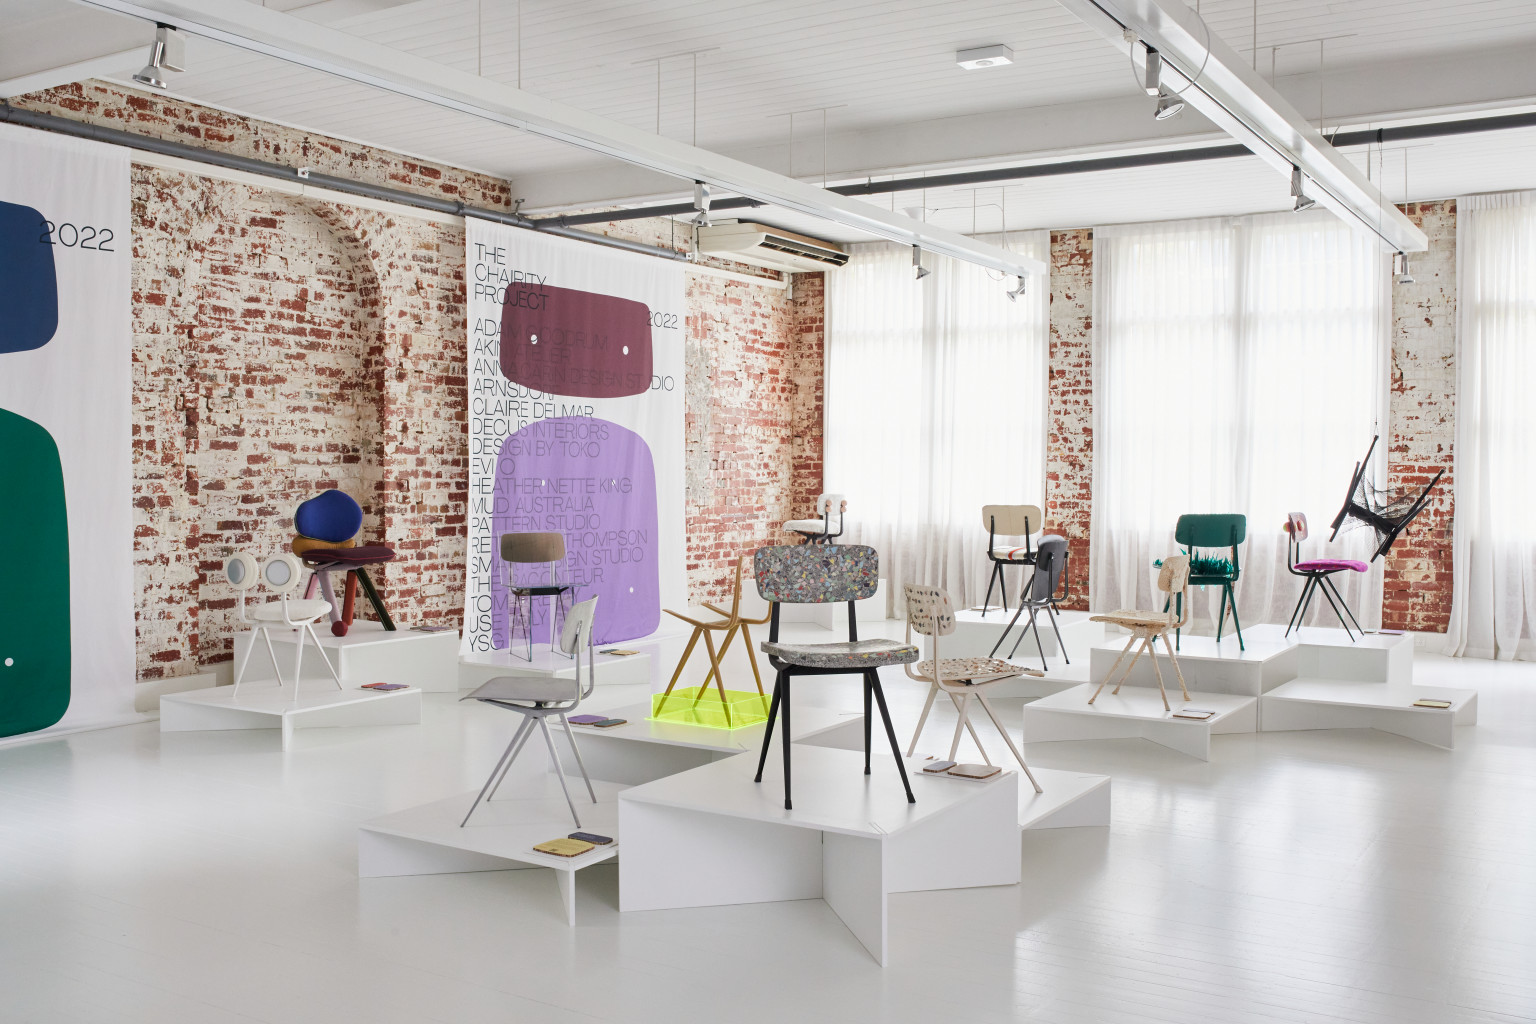 Chairity By Cult Design During Melbourne Design Week 2022 Photo Cathy Marshall 1536x1024 